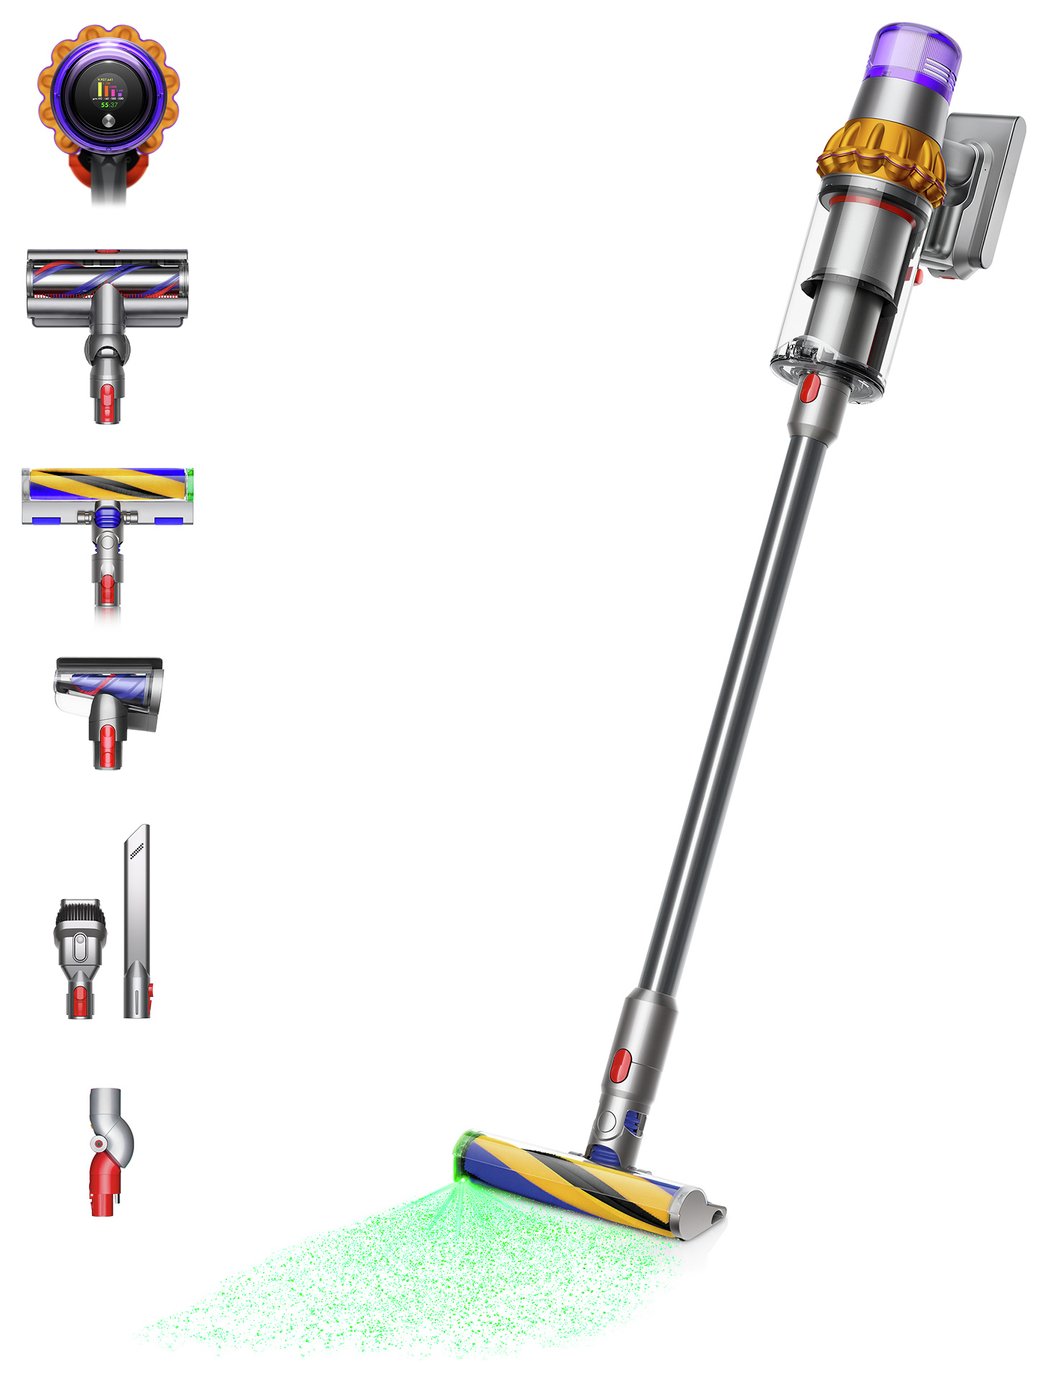 Dyson V15 Detect Absolute Cordless Vacuum Cleaner